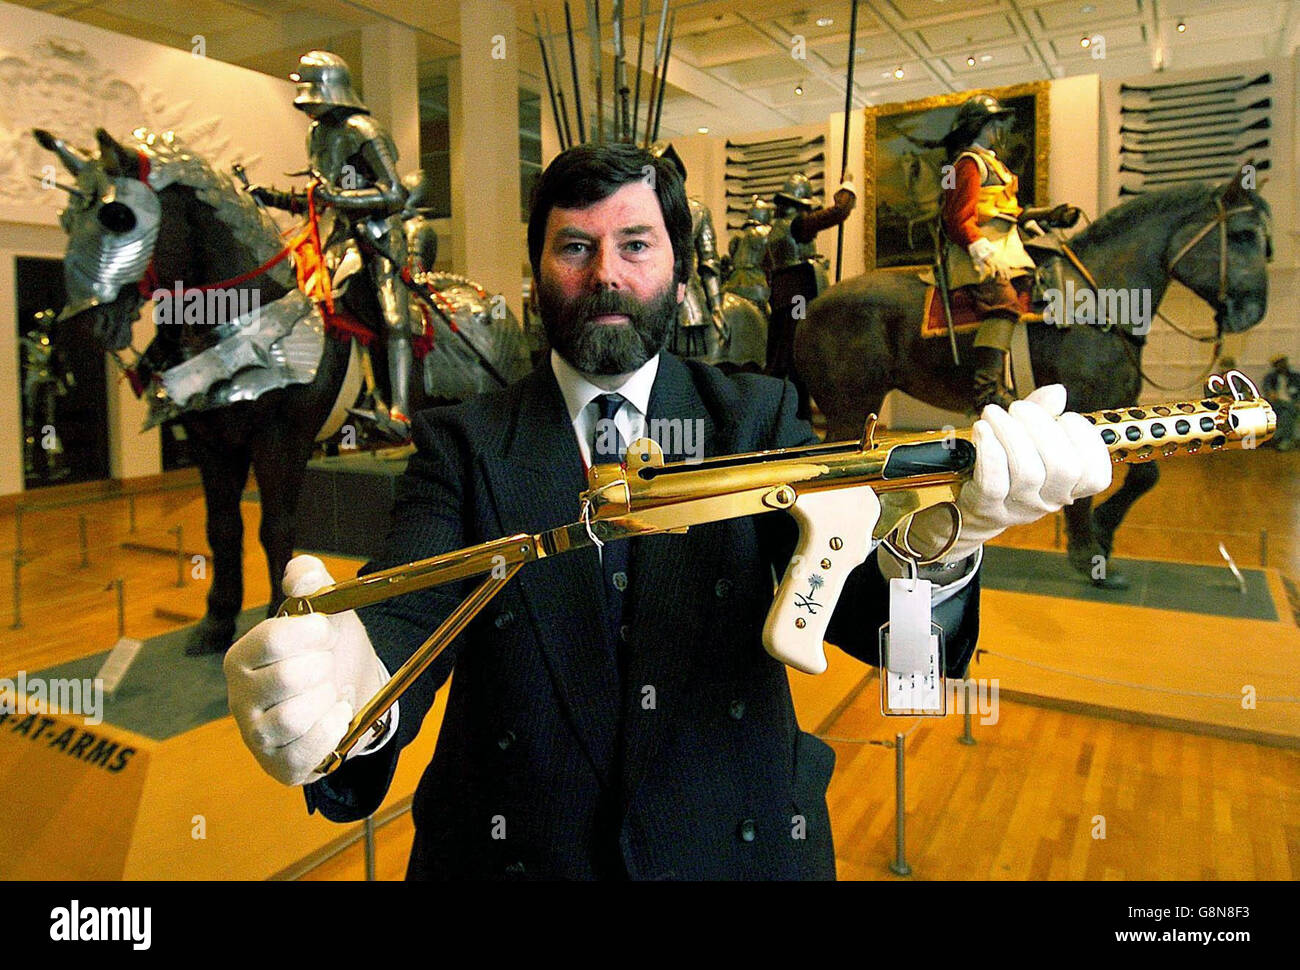 Graham Rimer from the Royal Armouries holds a gold-plated Sterling sub-machine gun that was one of a batch made for an Arab state's Royal Guard, in the Royal Armouries in Leeds, Thursday September 1, 2005. An historic Ministry of Defence collection of working military firearms that was originally kept in the Tower of London before being dispersed has been rehoused today at the national museum of arms and armour in Leeds. See PA story DEFENCE Guns. PRESS ASSOCIATION Photo. Photo credit should read: John Giles/PA. Stock Photo